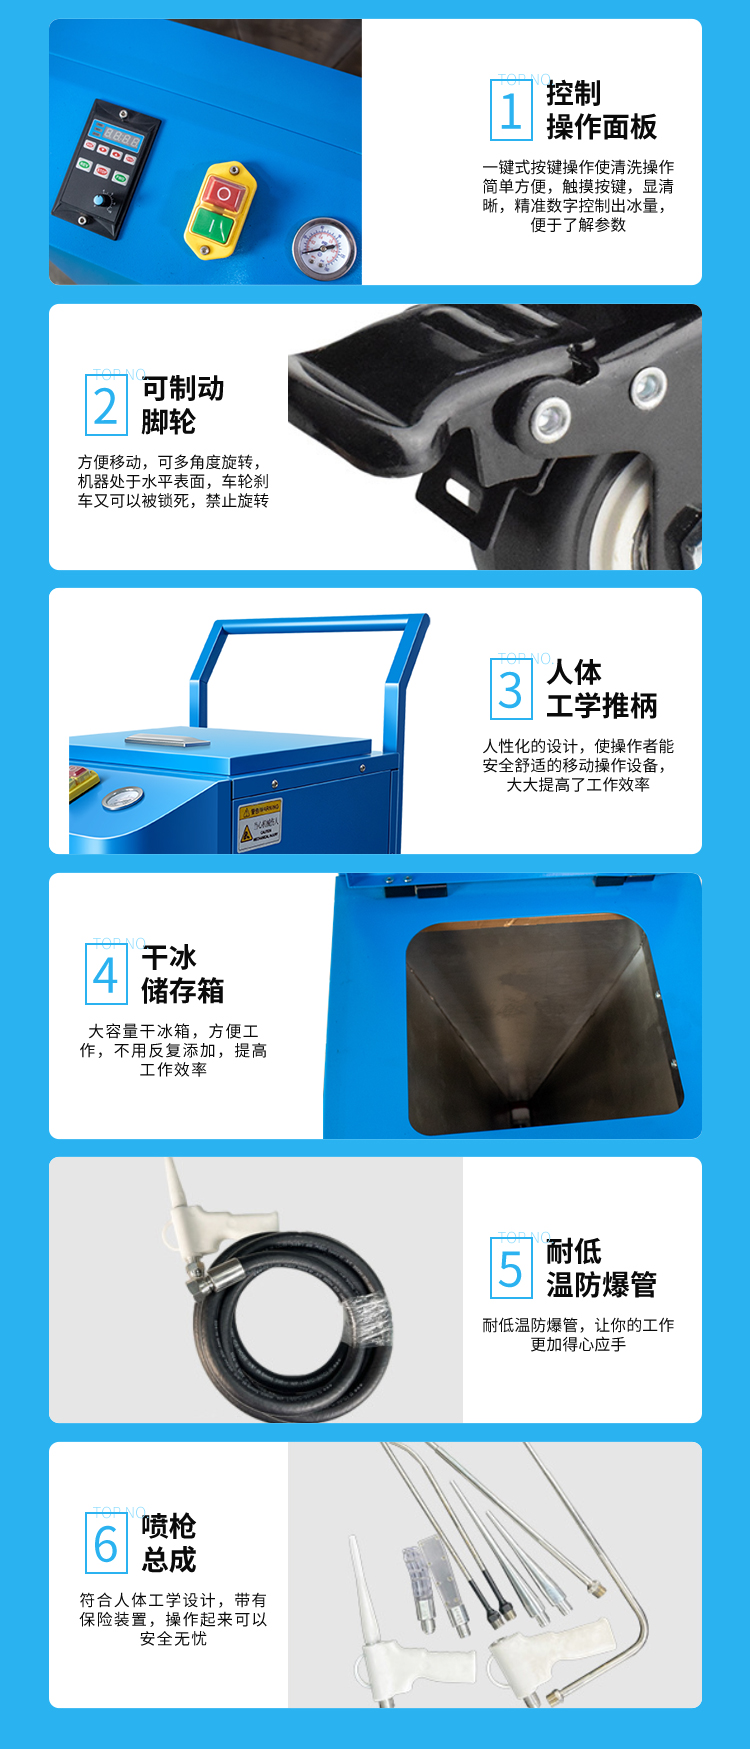 Dry ice mold cleaning machine Industrial oil and water free cleaning machine Printing oil and burrs cleaning equipment